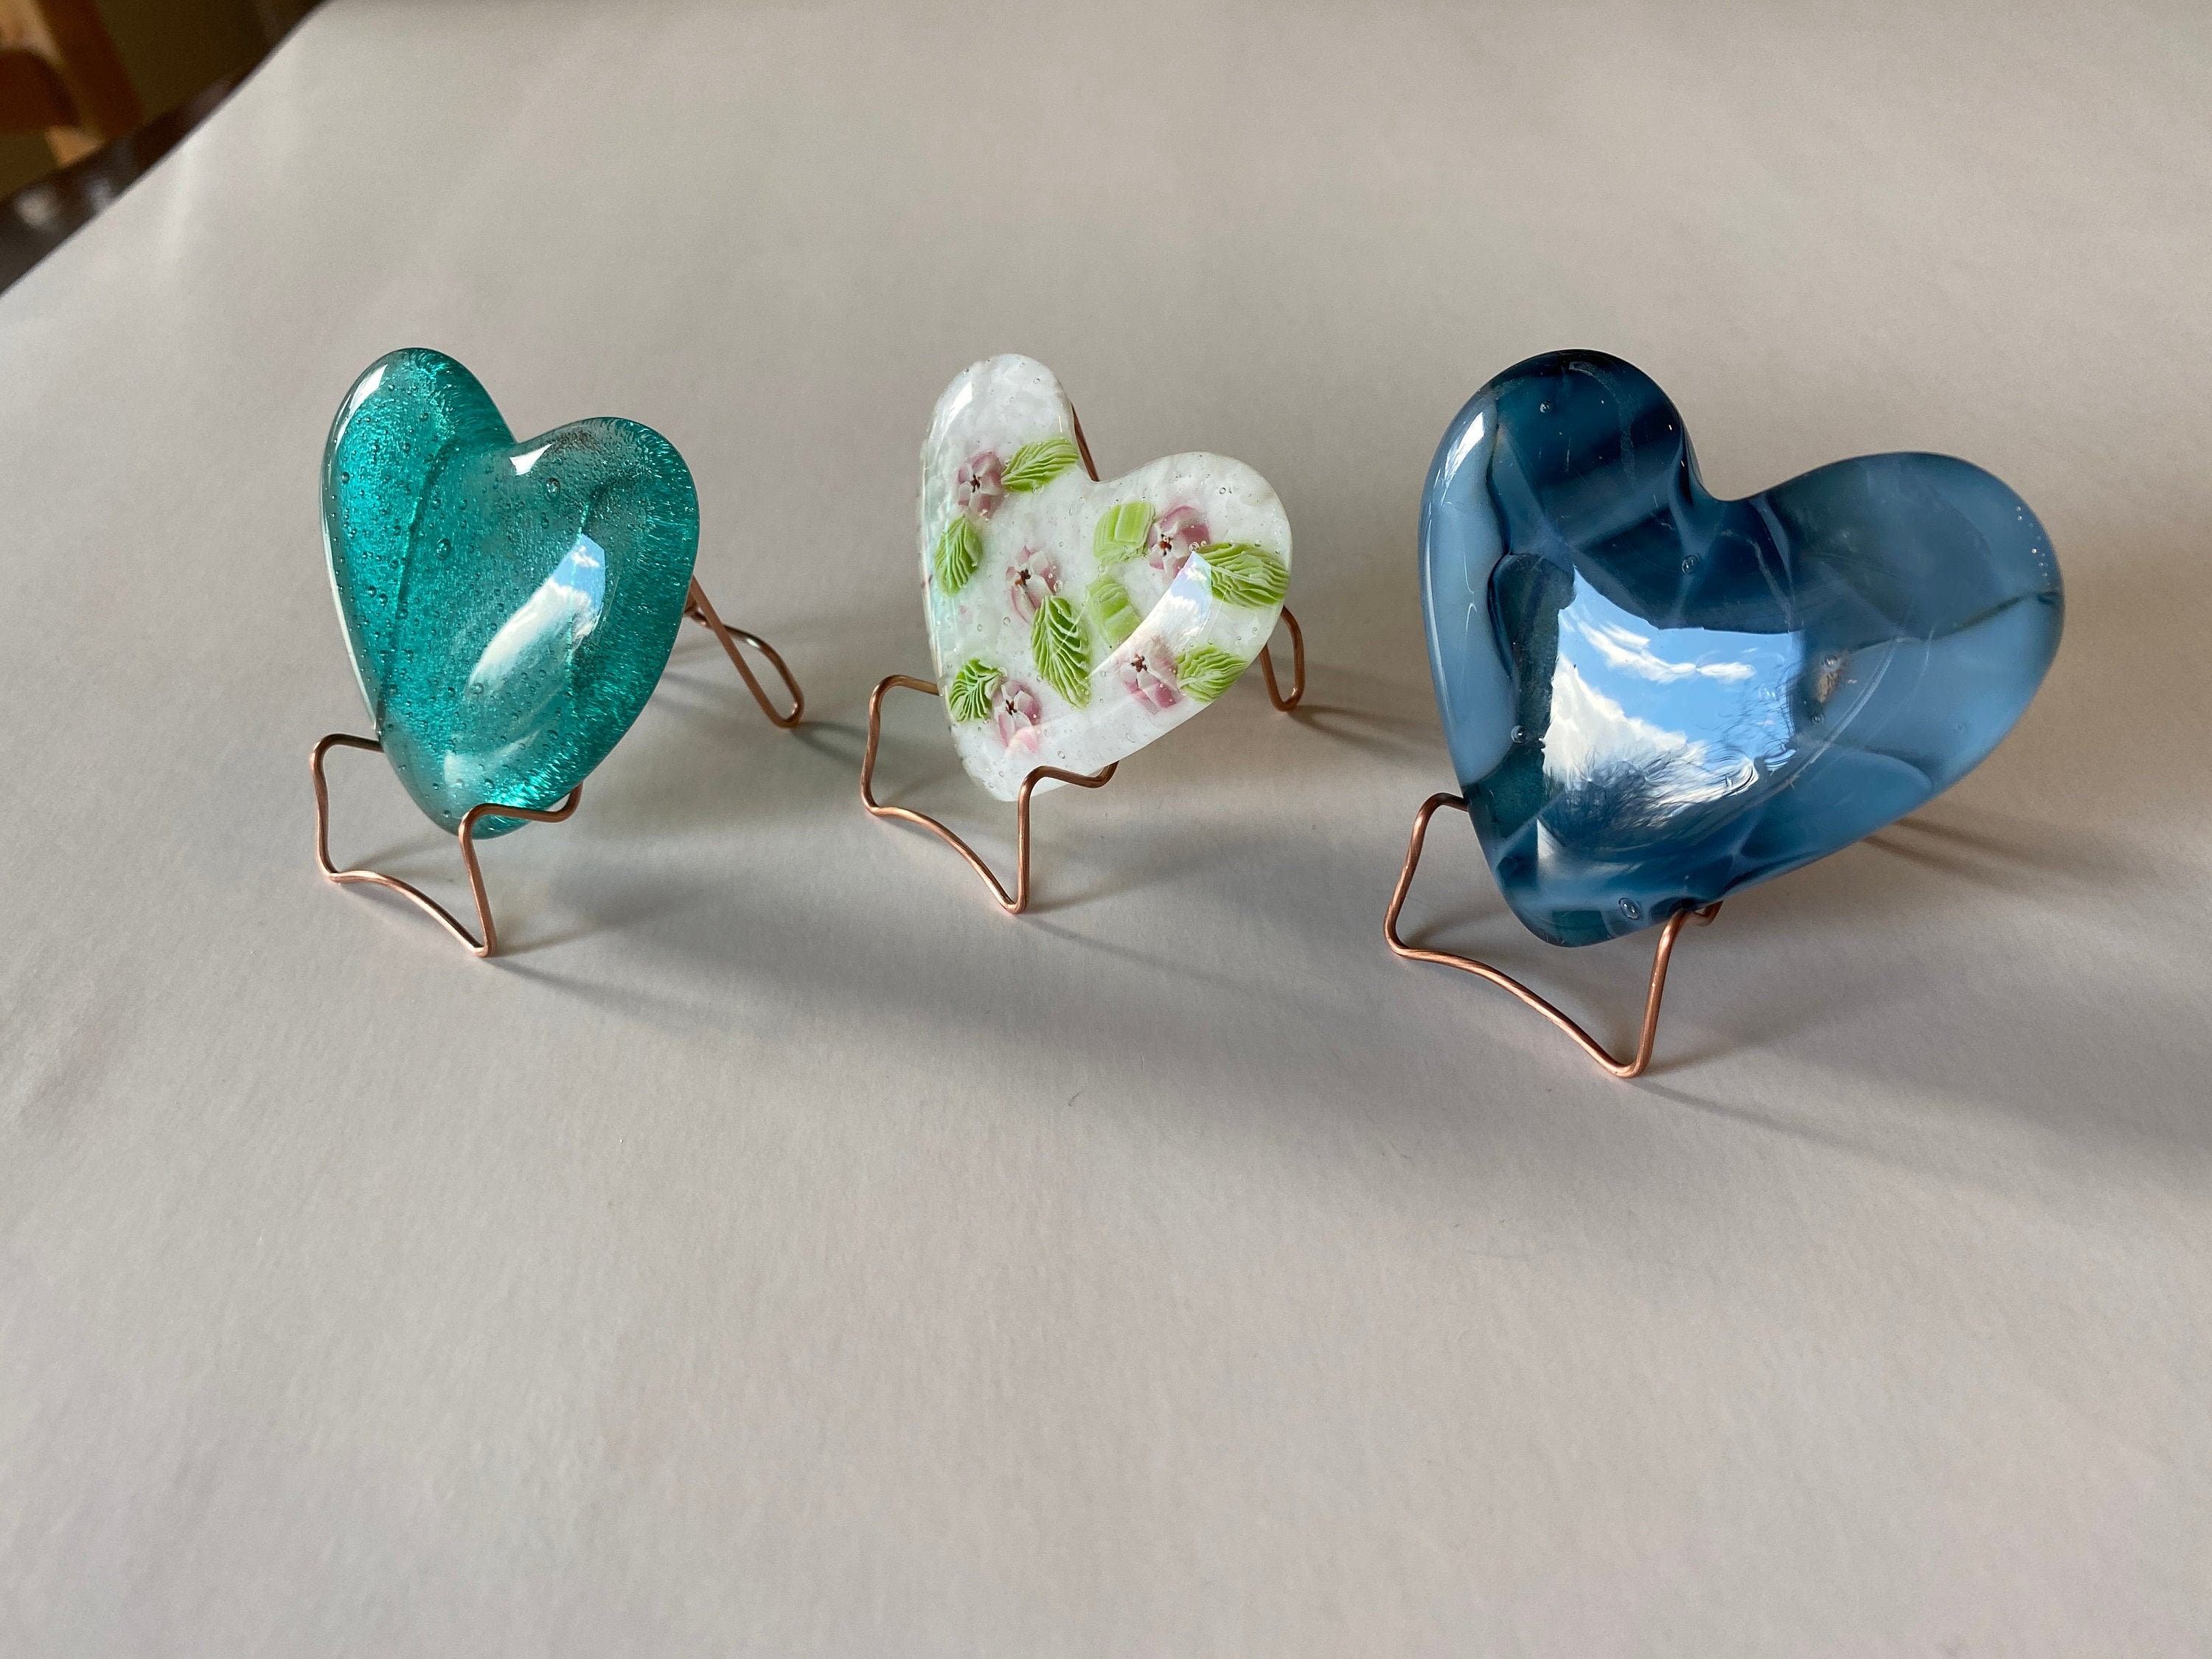 Resin Hearts by Bea_utiful Creations - GlassCast